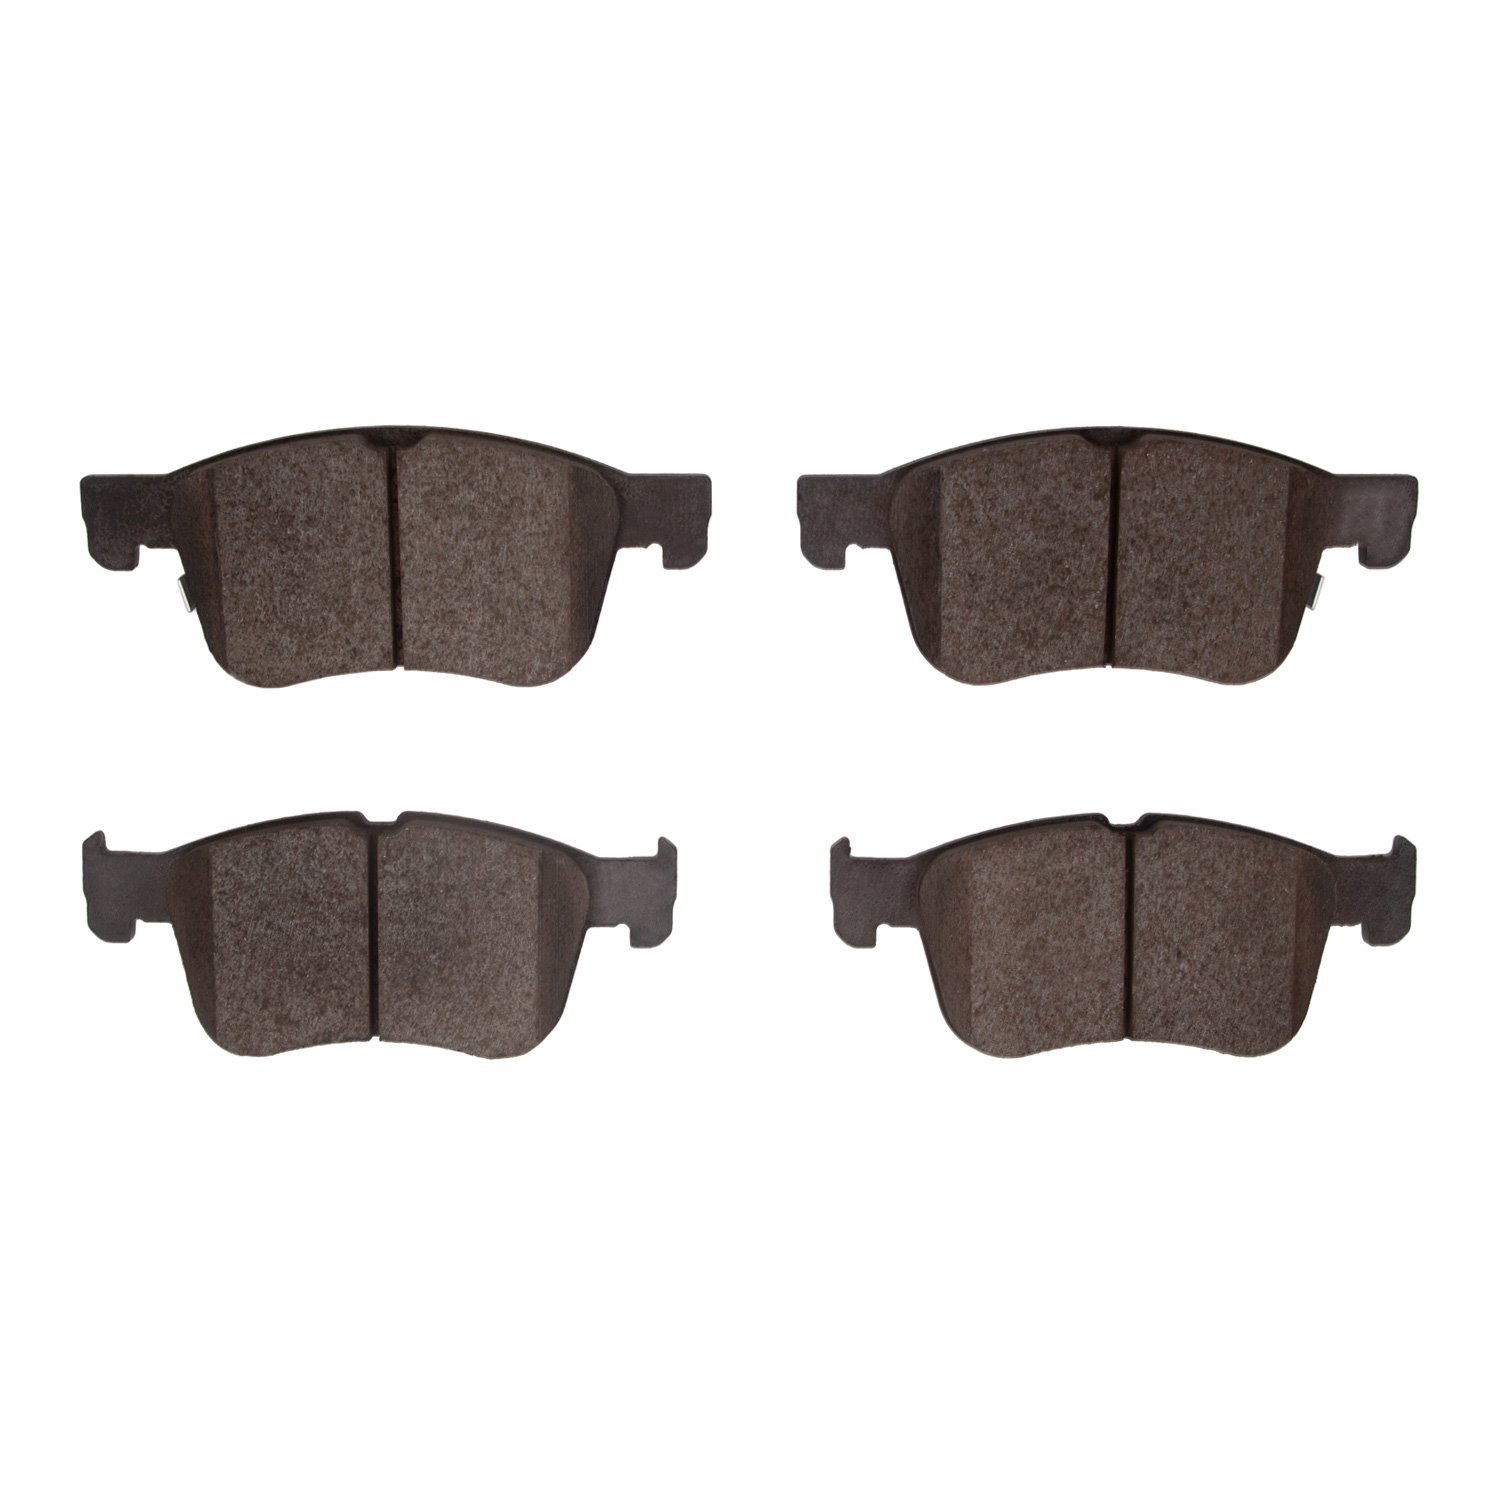 Ceramic Brake Pads, Fits Select Ford/Lincoln/Mercury/Mazda, Position: Front